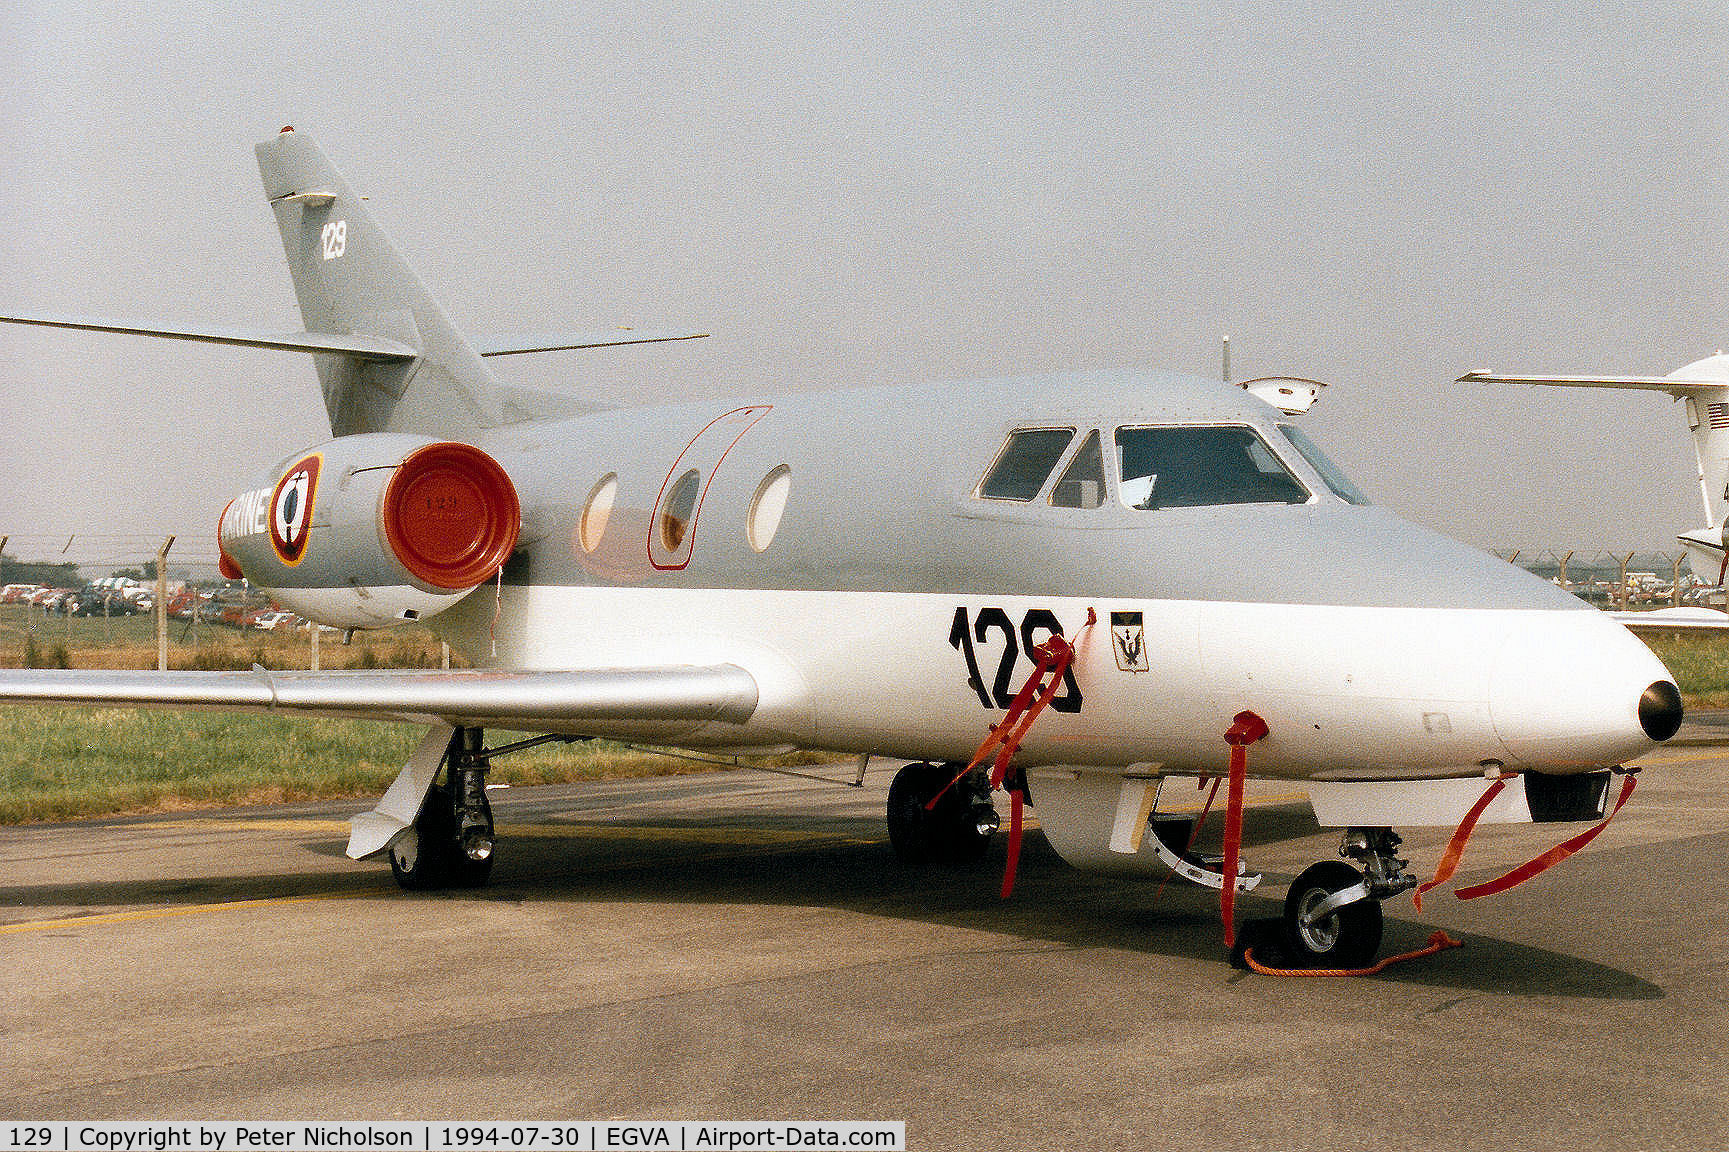 129, 1978 Dassault Falcon 10MER C/N 129, French Aeronavale's Falcon 10MER, callsign FMN 571, on display at the 1994 Intnl Air Tattoo at RAF Fairford.